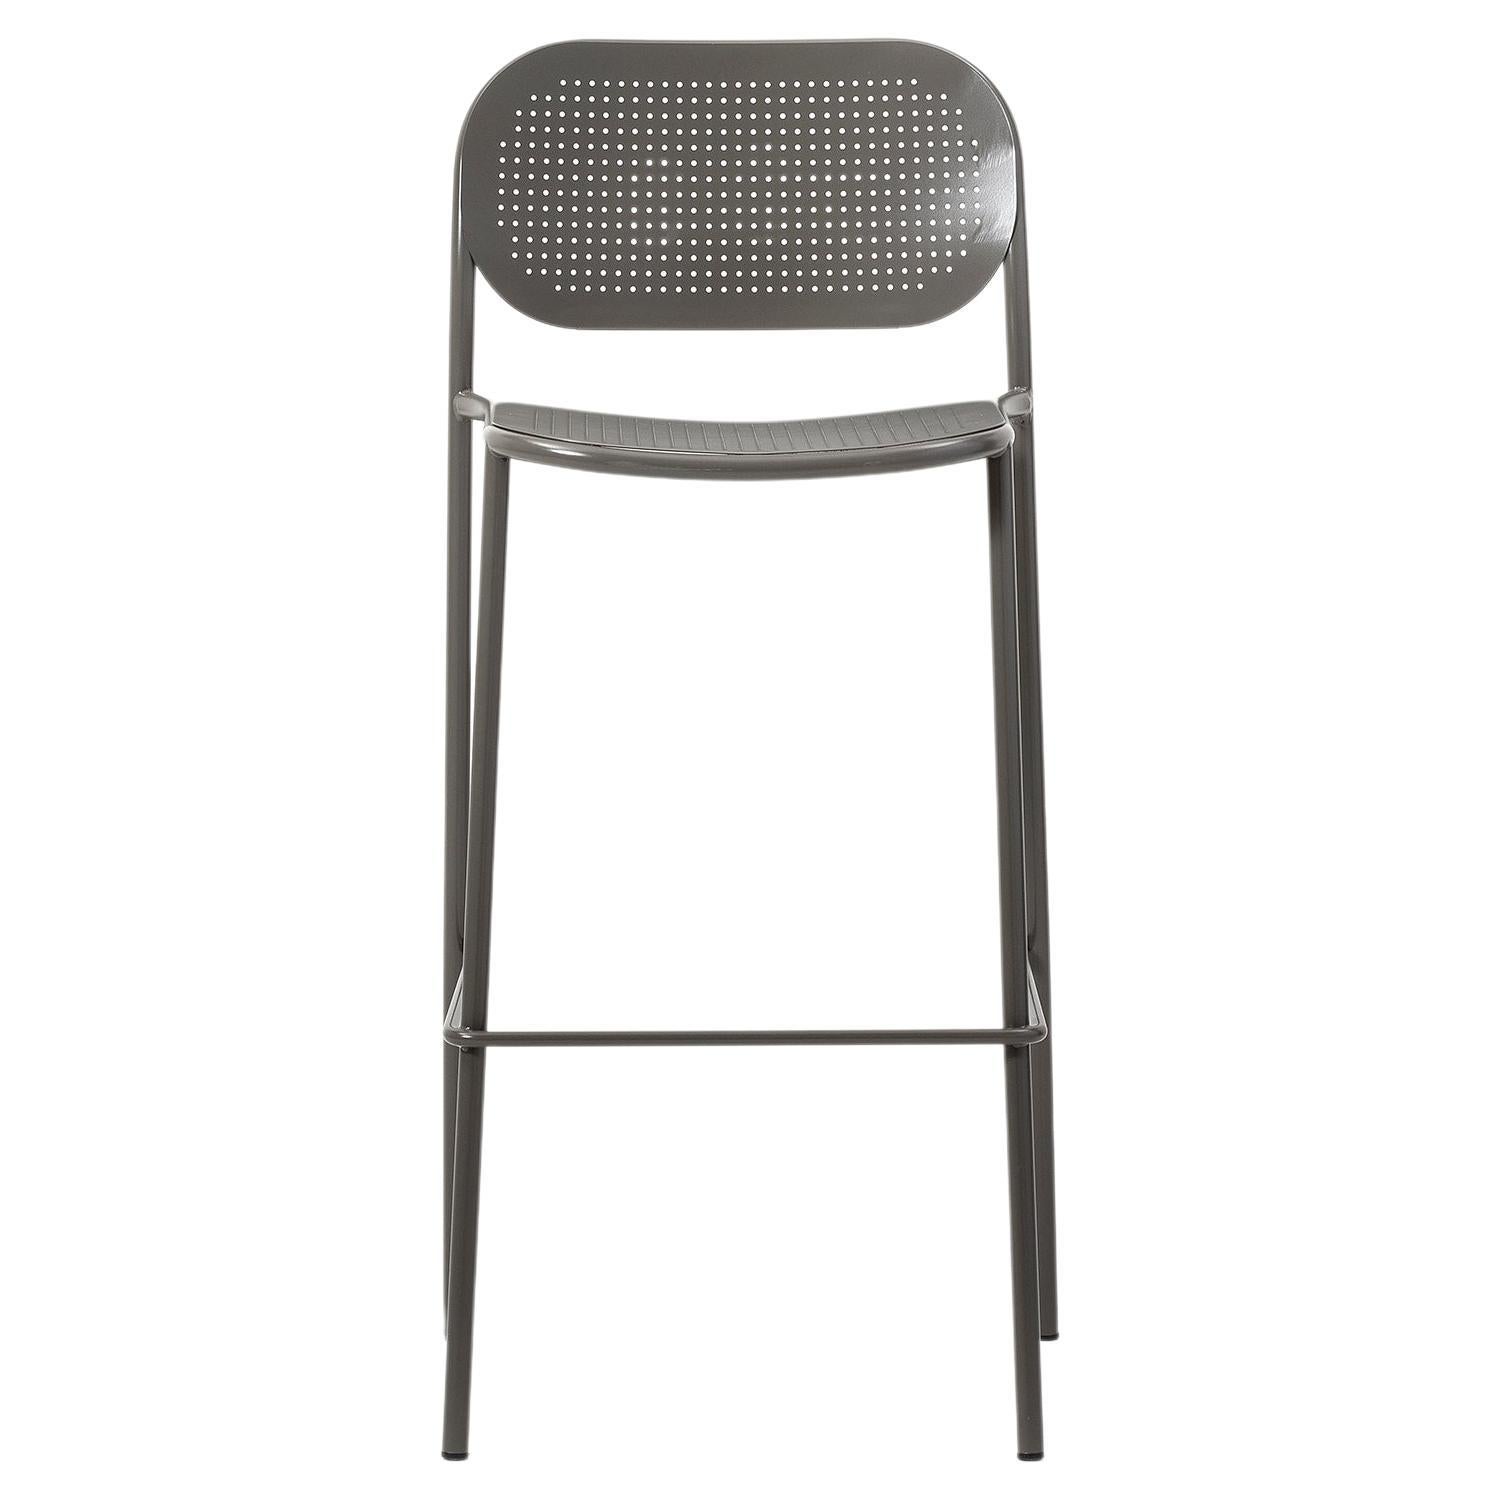 The collection Metis Dot includes the chair with or without armrest, the lounge version with or without armrest and the stool in two heights. In all its variants, the tubular metal structure is completed by the seat and back in sheet metal with